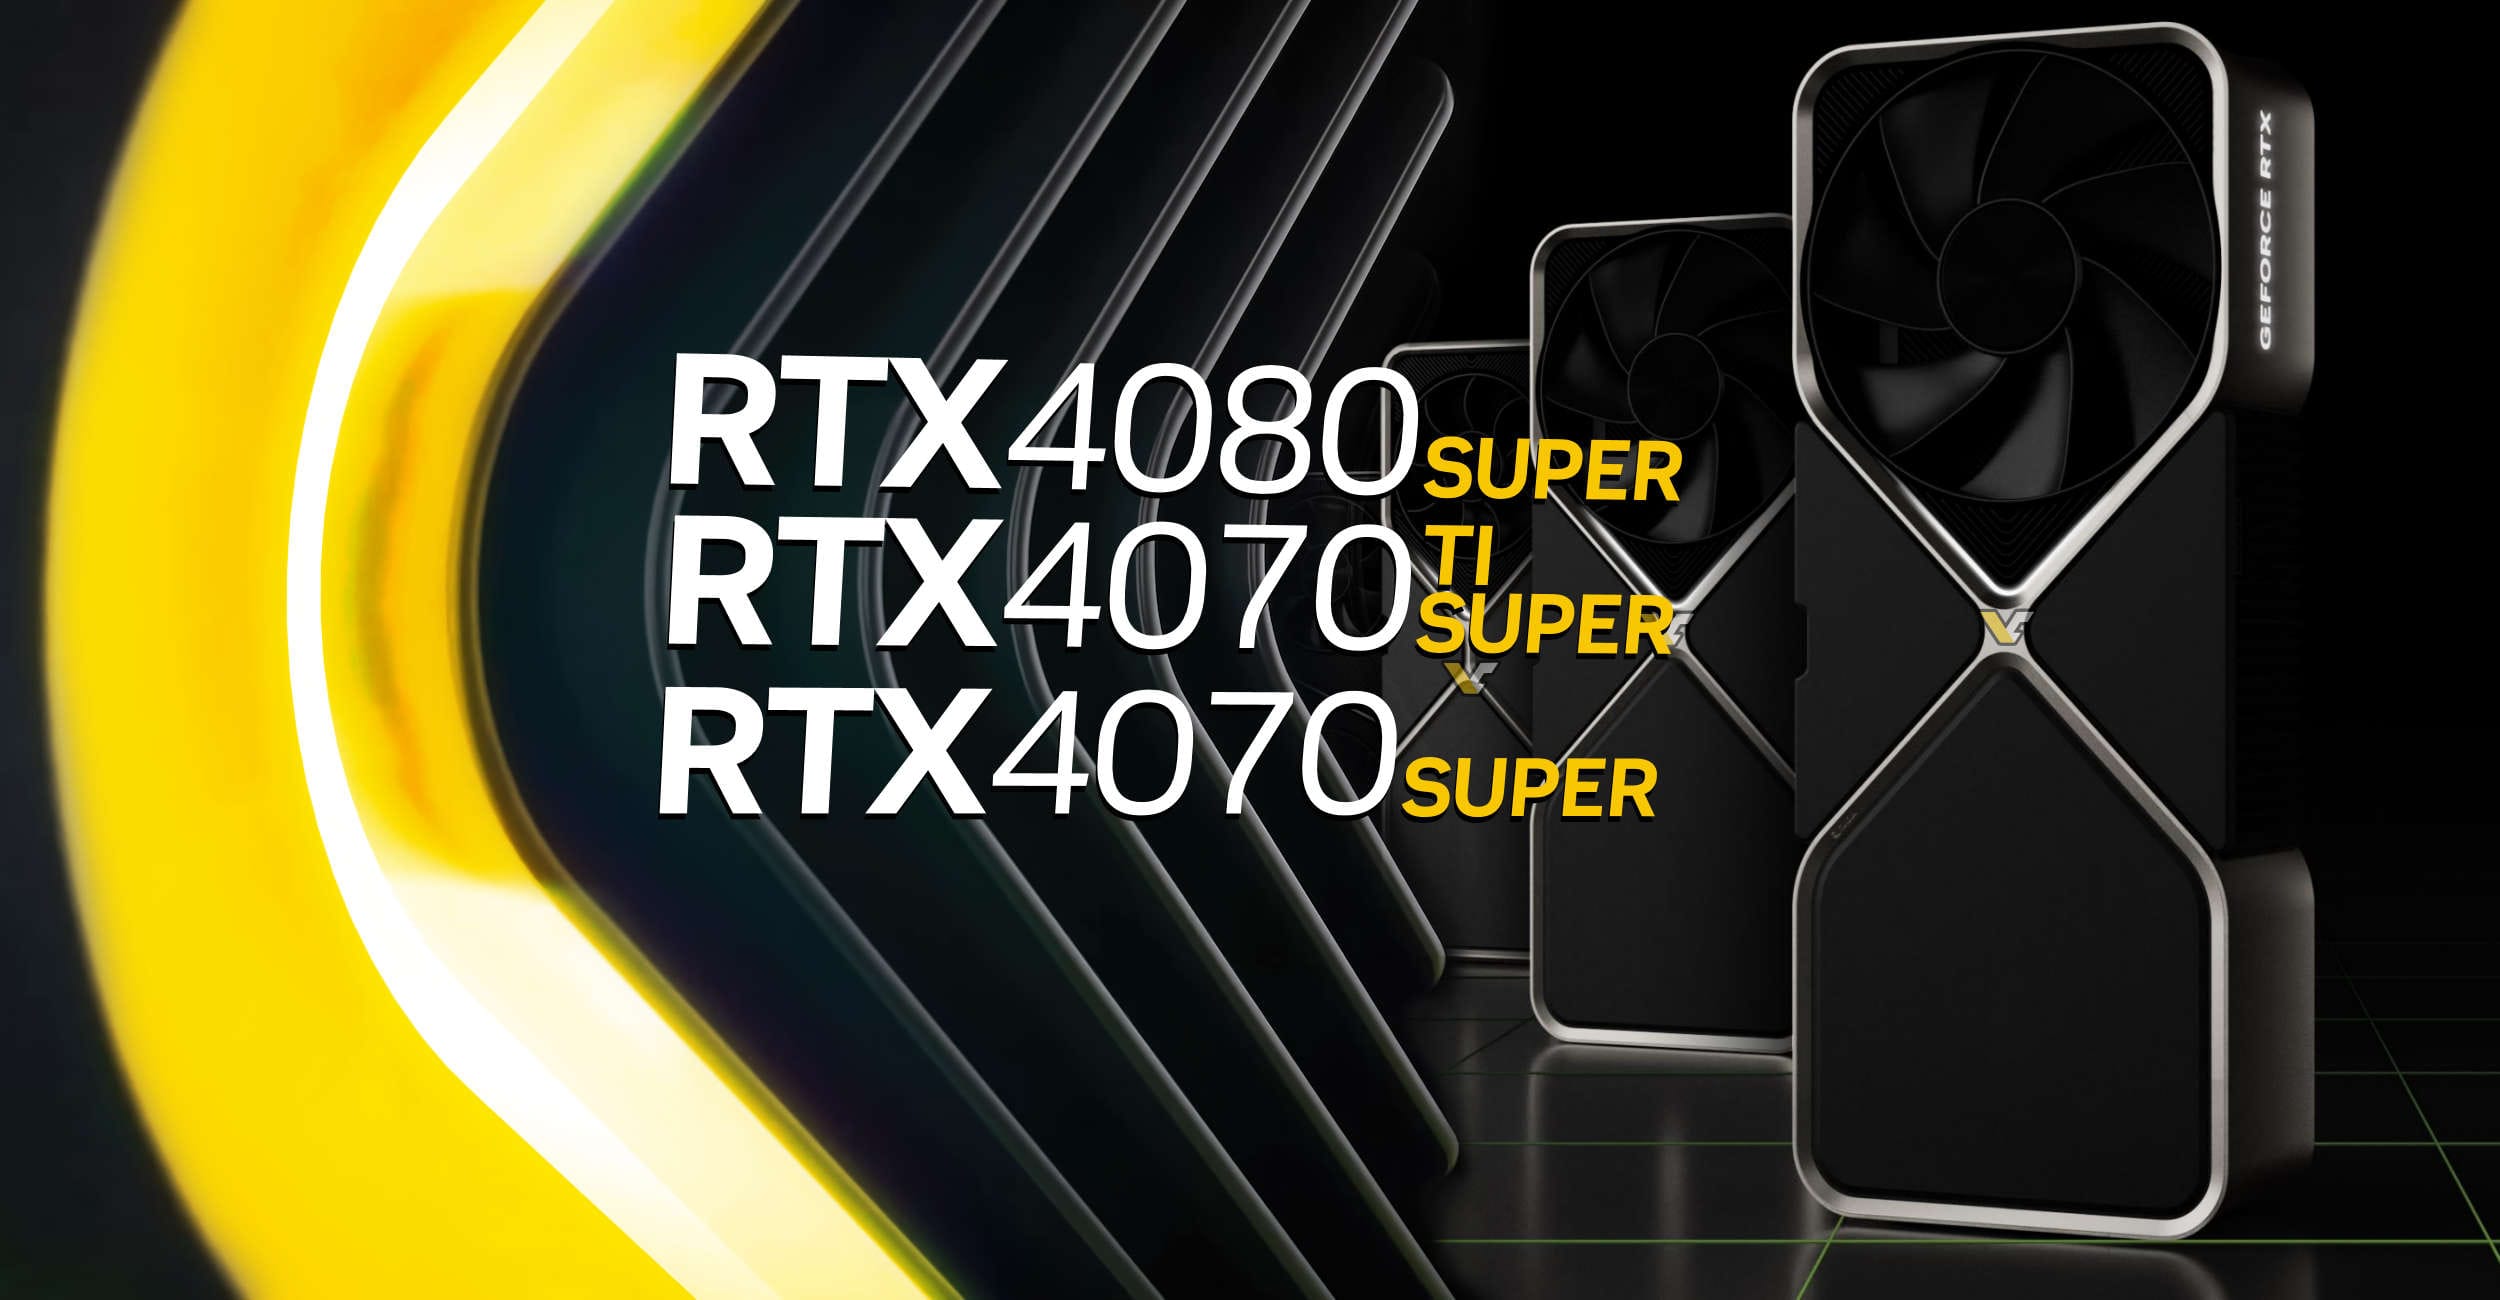 GeForce RTX 4080 SUPER reviews rescheduled to January 31st 